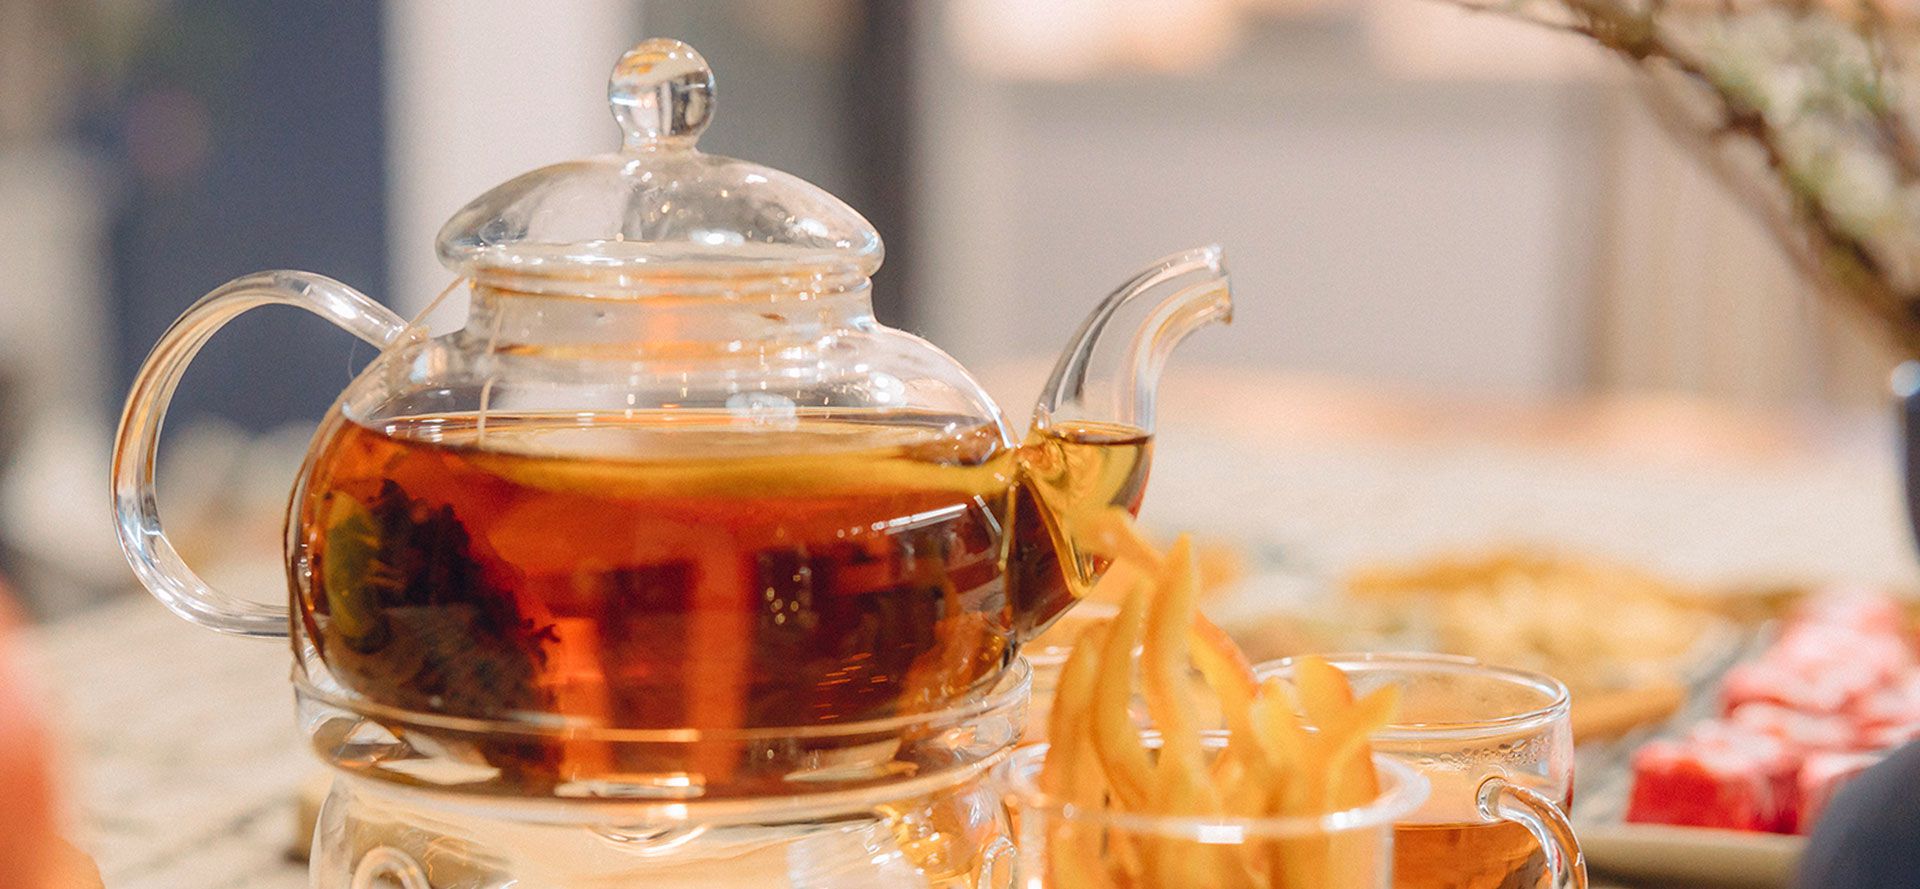 Glass Teapot Filled With Black Tea.